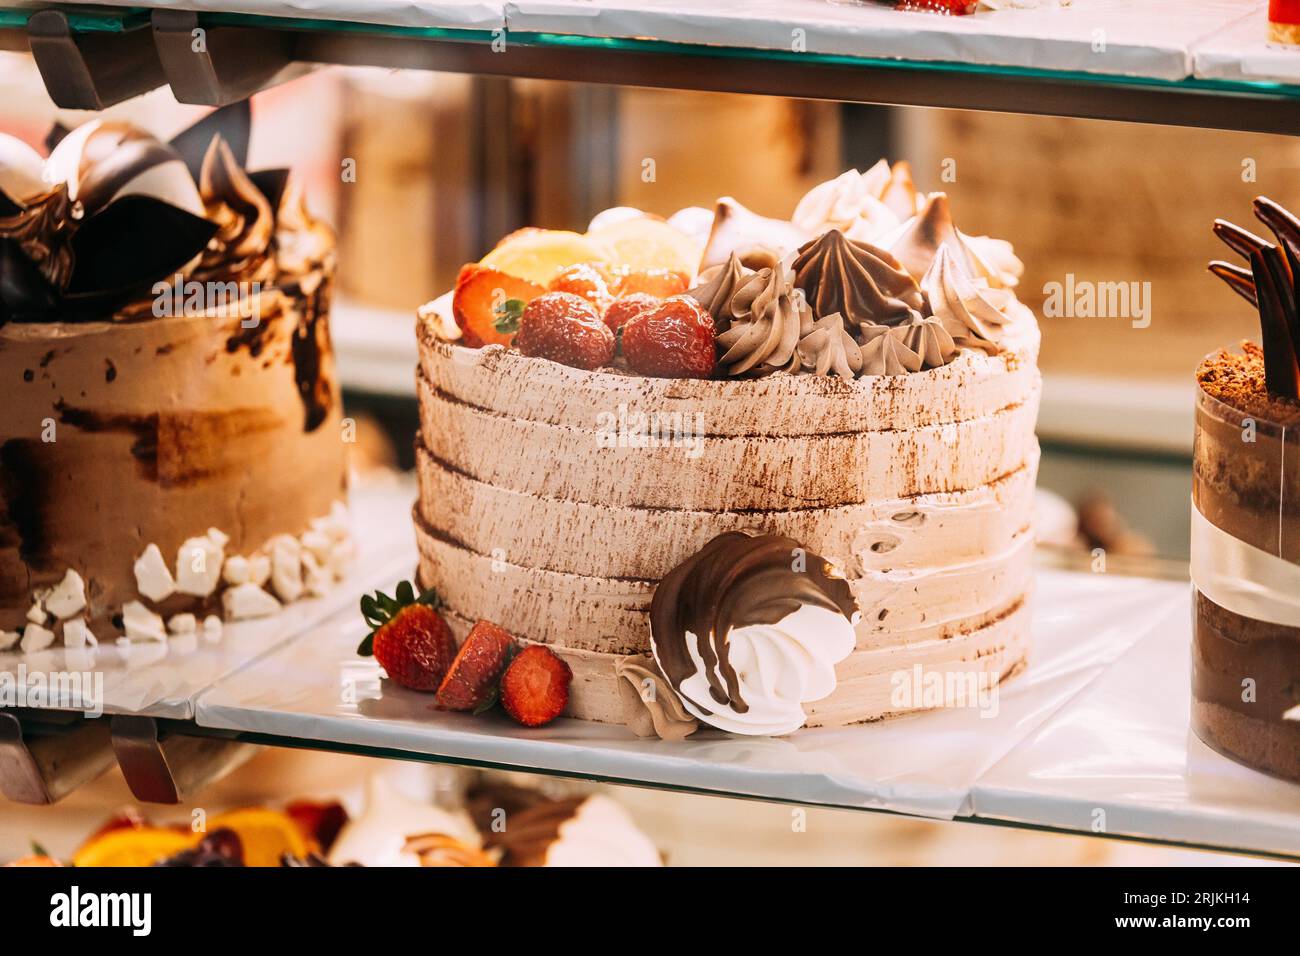 Top 5 Best Bakeries in Houston for Custom Cakes - Recipe to Cook